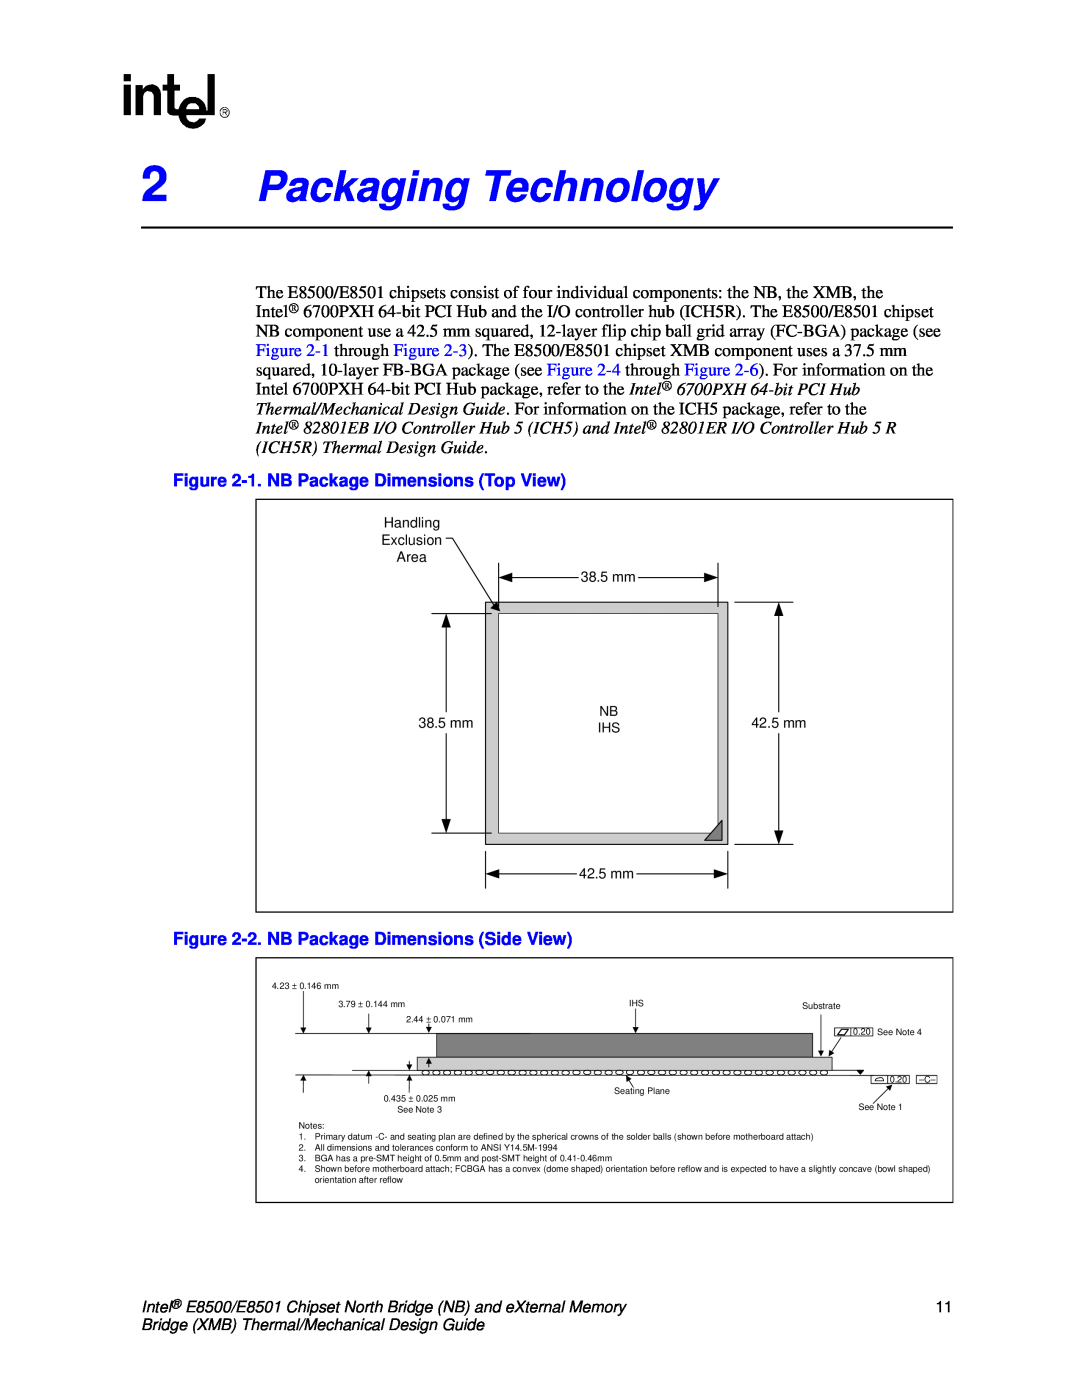 Intel E8501 manual 2Packaging Technology, 1.NB Package Dimensions Top View, 2.NB Package Dimensions Side View 